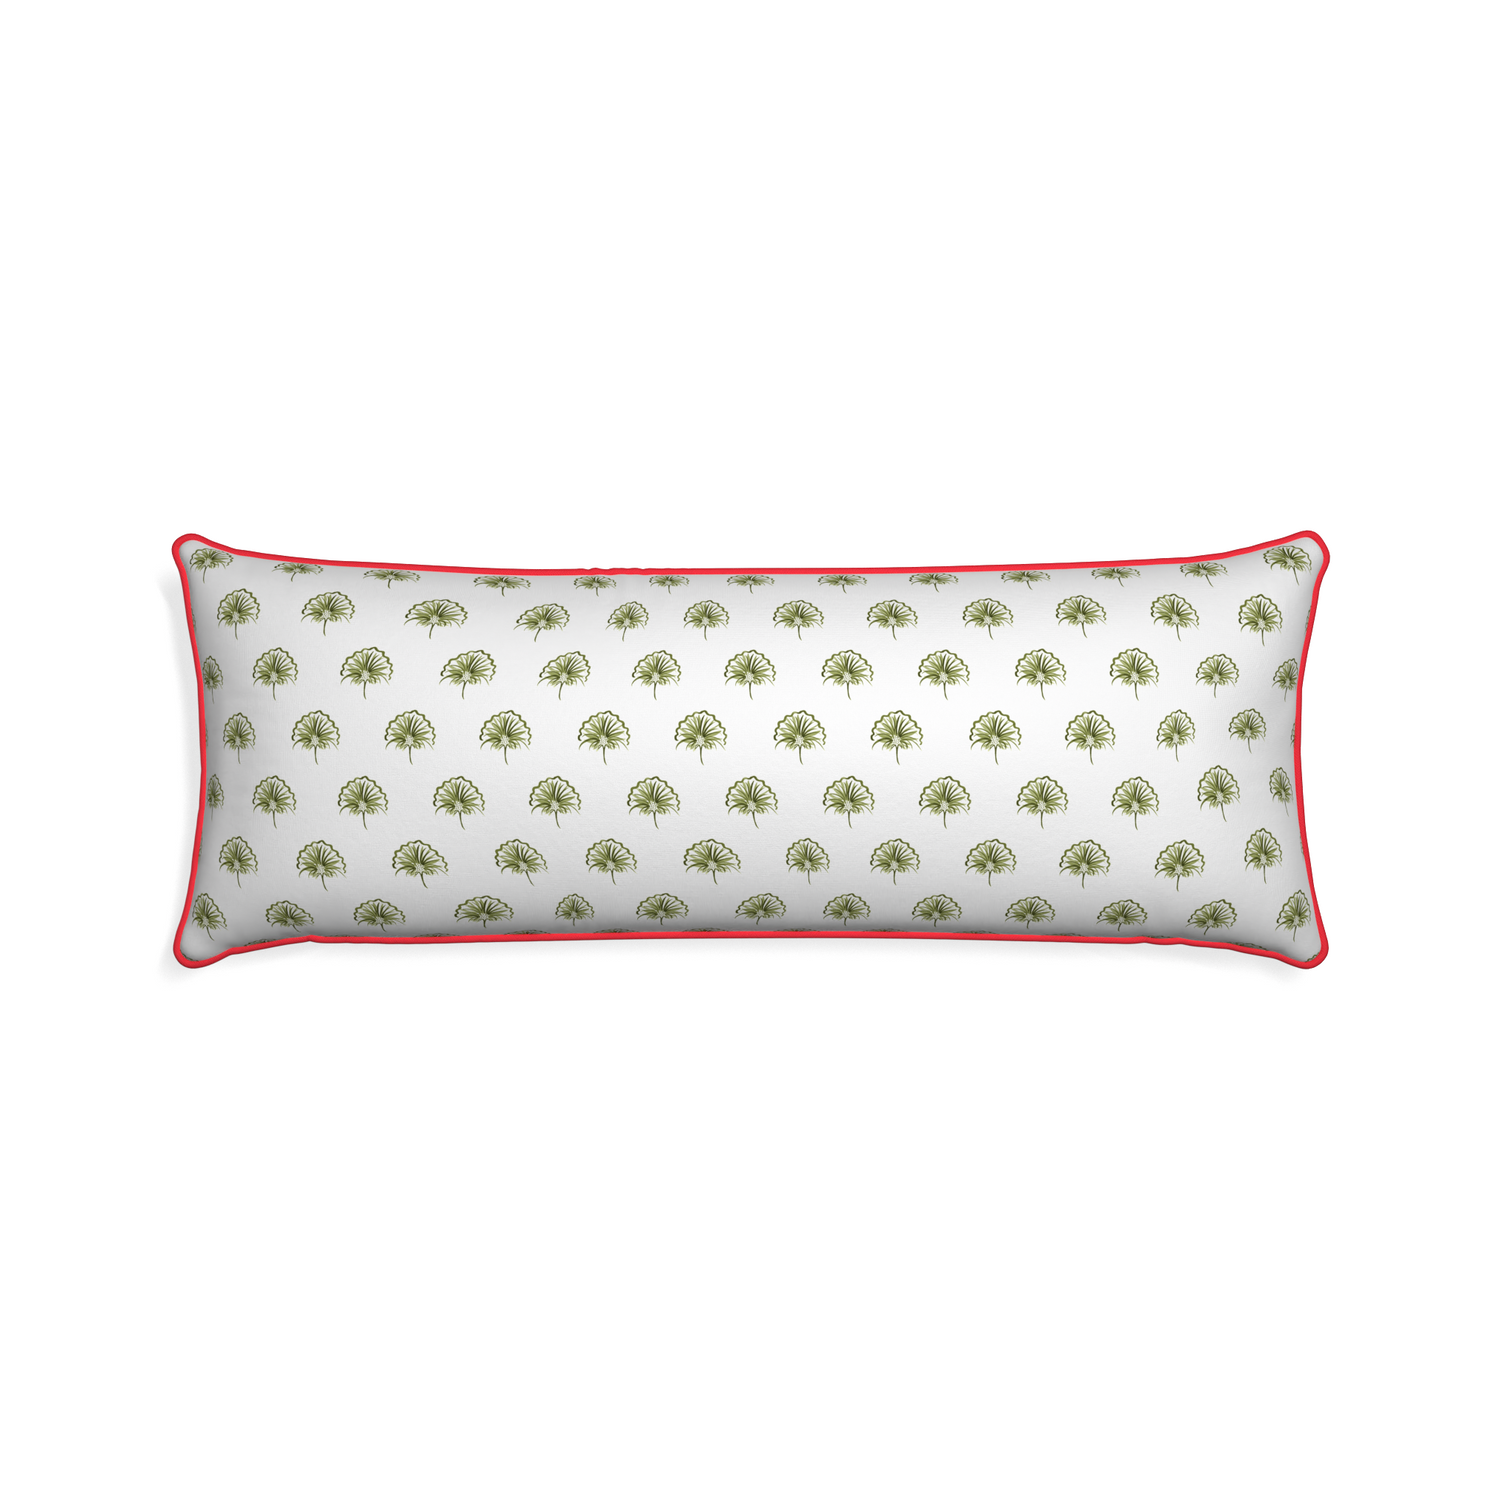 Xl-lumbar penelope moss custom pillow with cherry piping on white background